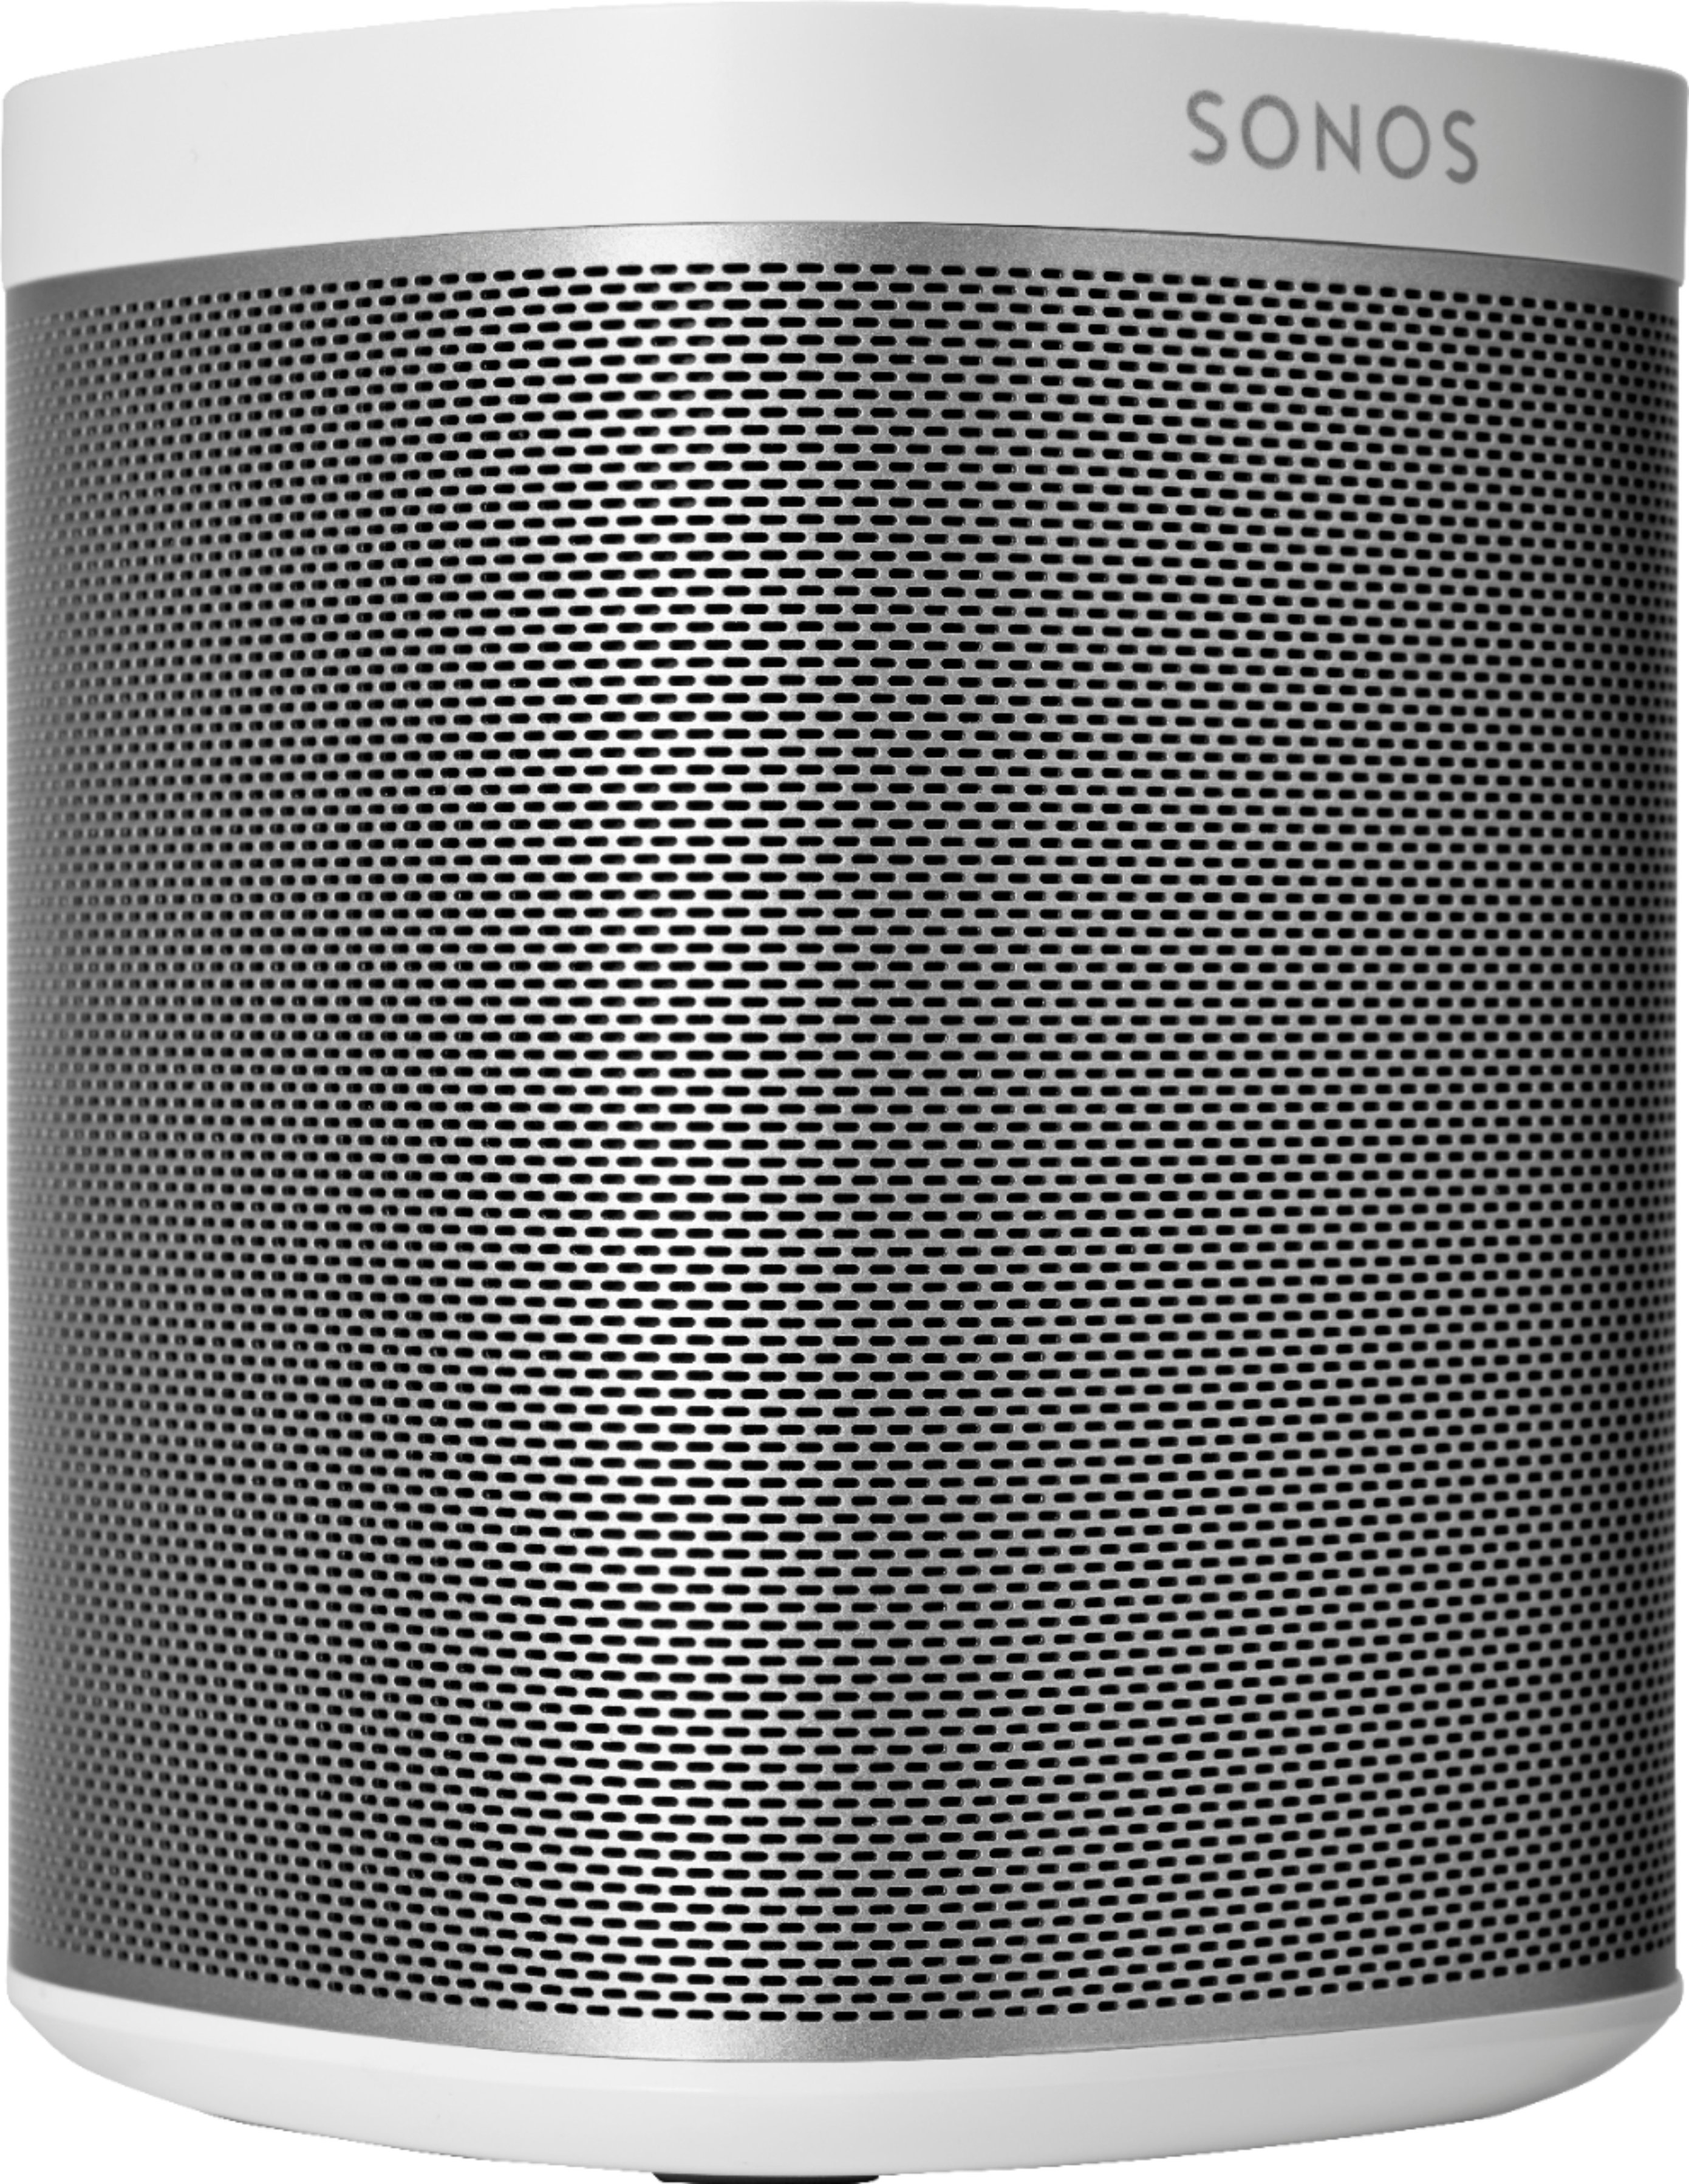 Angle View: Sonos - Geek Squad Certified Refurbished PLAY:1 Wireless Speaker for Streaming Music - White